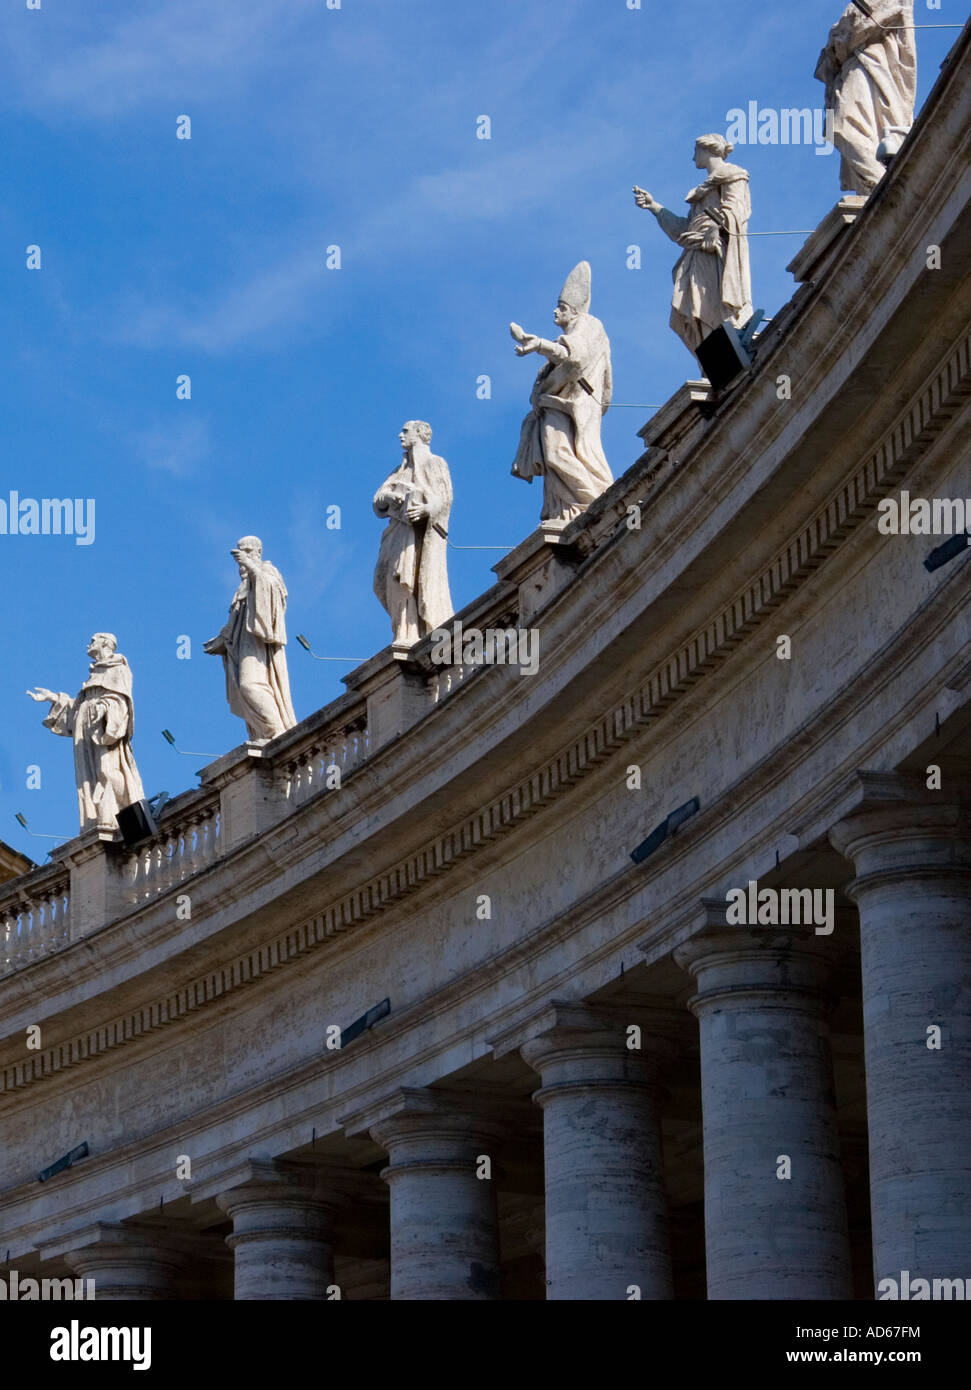 Saint Peter s Piazza Piazza San Pietro and St Peter s Basilica Vatican City Italy Stock Photo